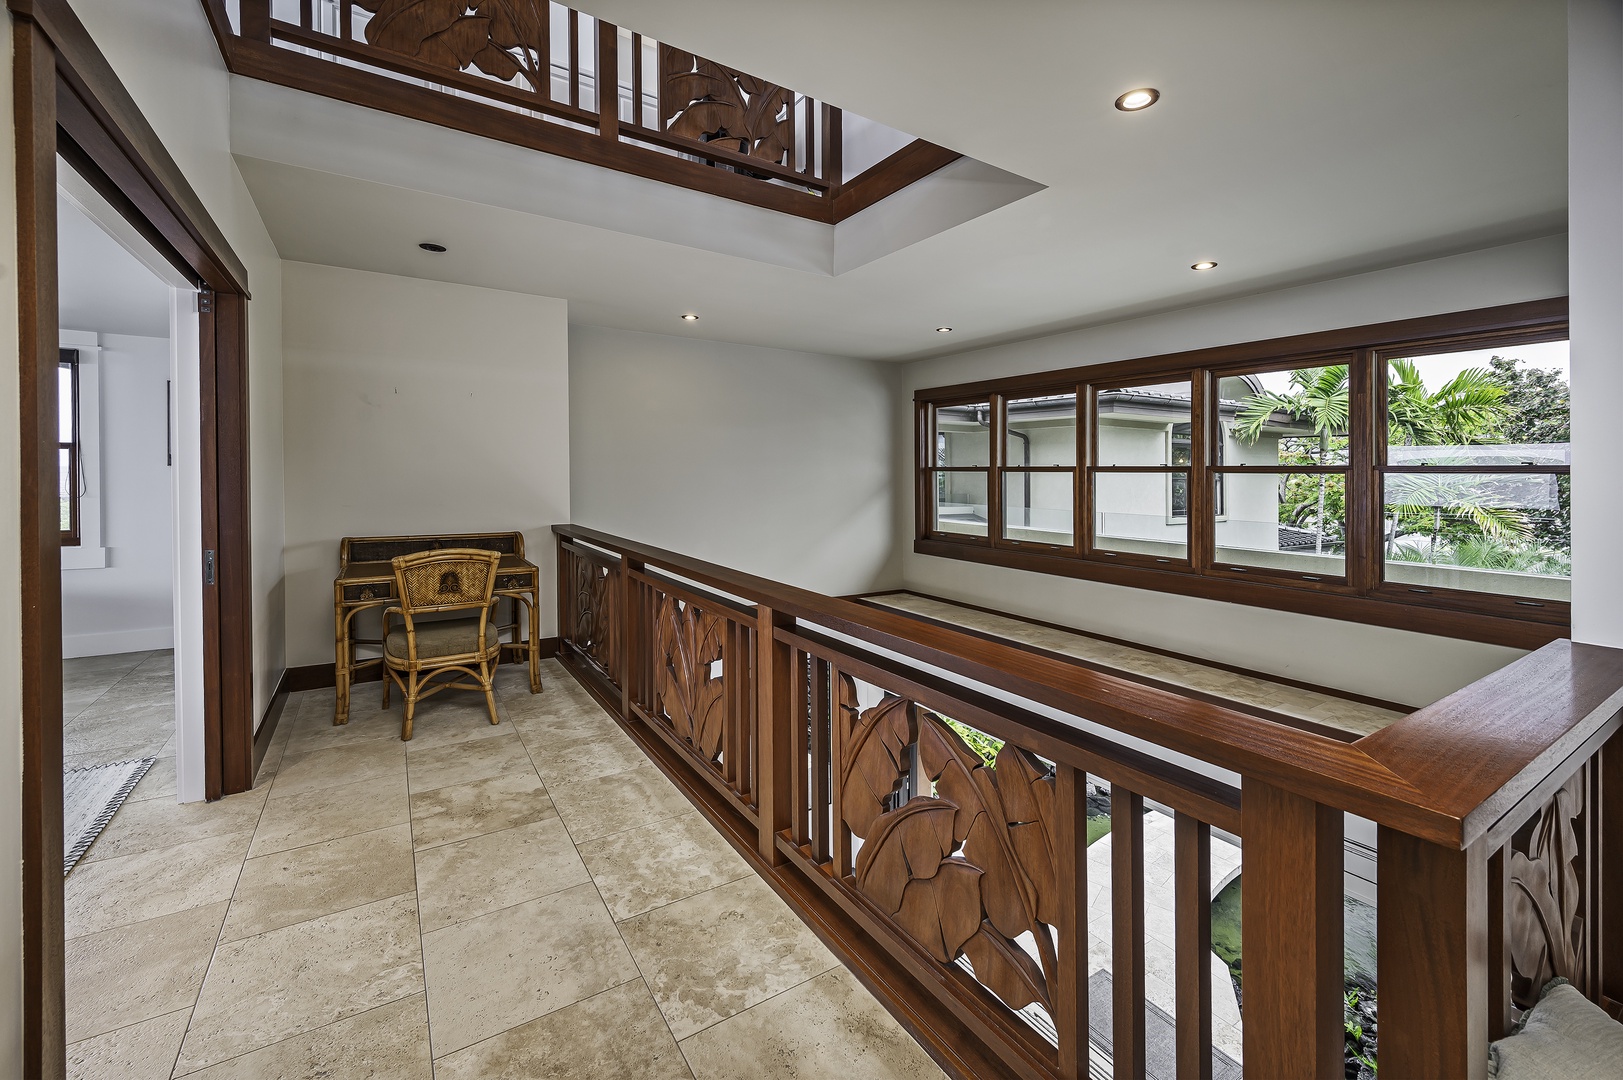 Kailua Kona Vacation Rentals, Alohi Kai Estate** - The second floor hosts two bedroom en suites that are accessed by the grand spiral staircase